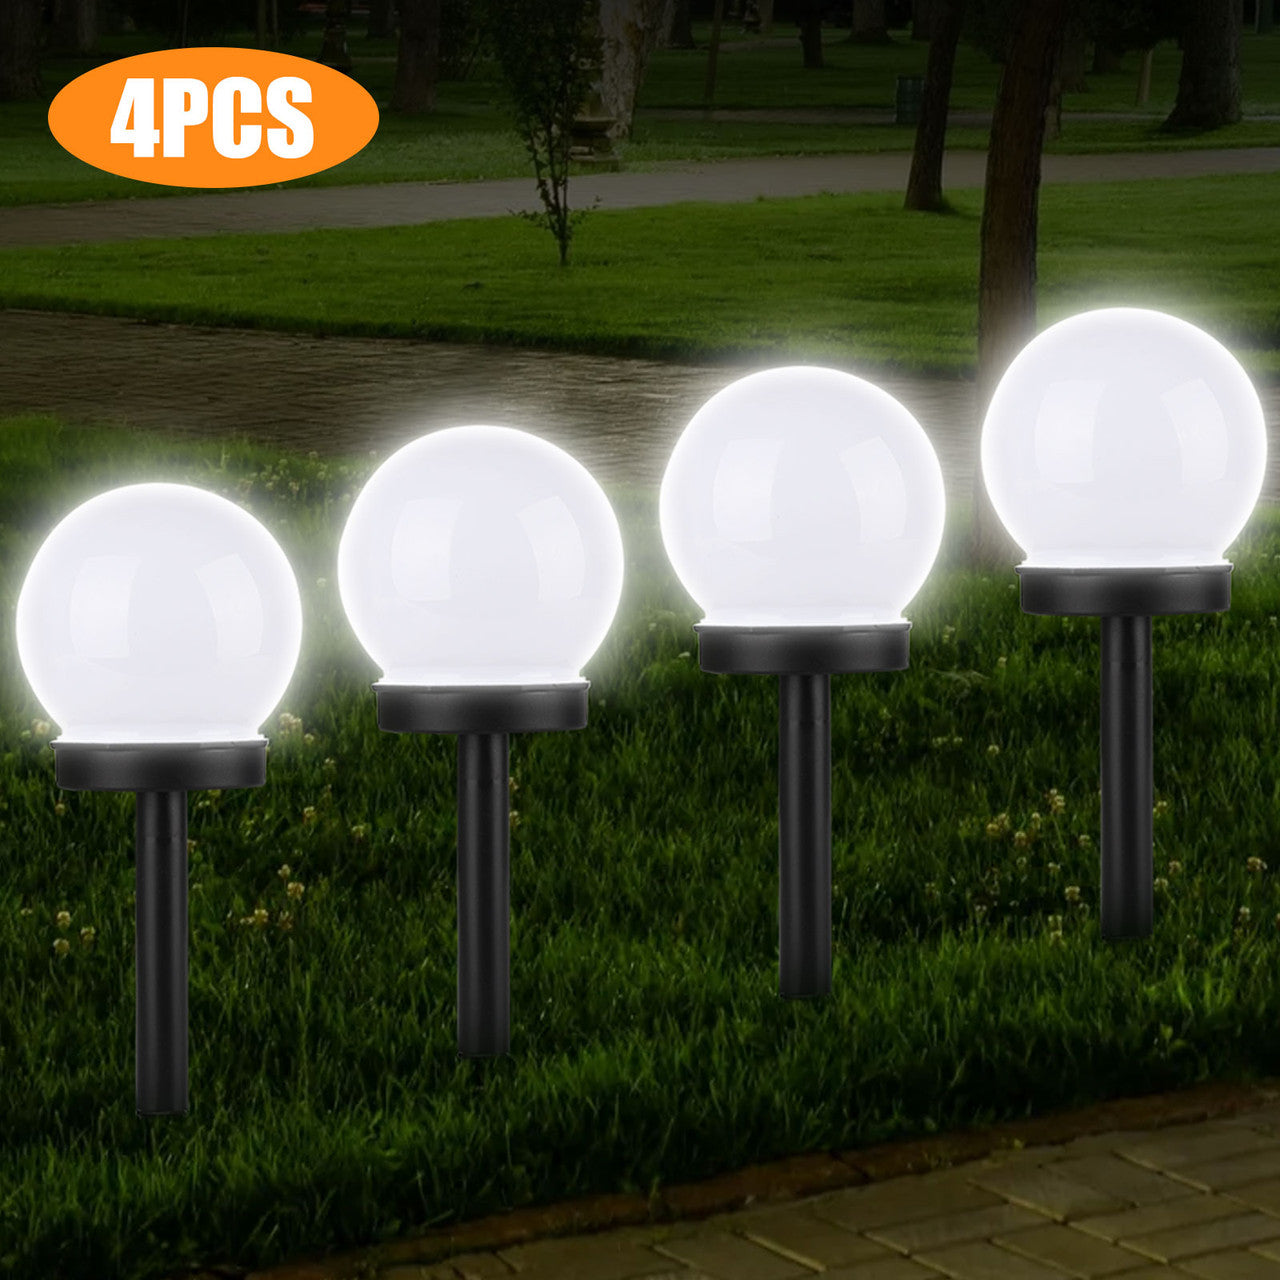 Outdoor Solar Lights Ball Lamp, IP55 Waterproof LED Path Light with Auto On/Off Light Sensor, Solar Landscape Lighting for Yard Patio Walkway Pathway Outdoor Garden Path (White), 4Pcs